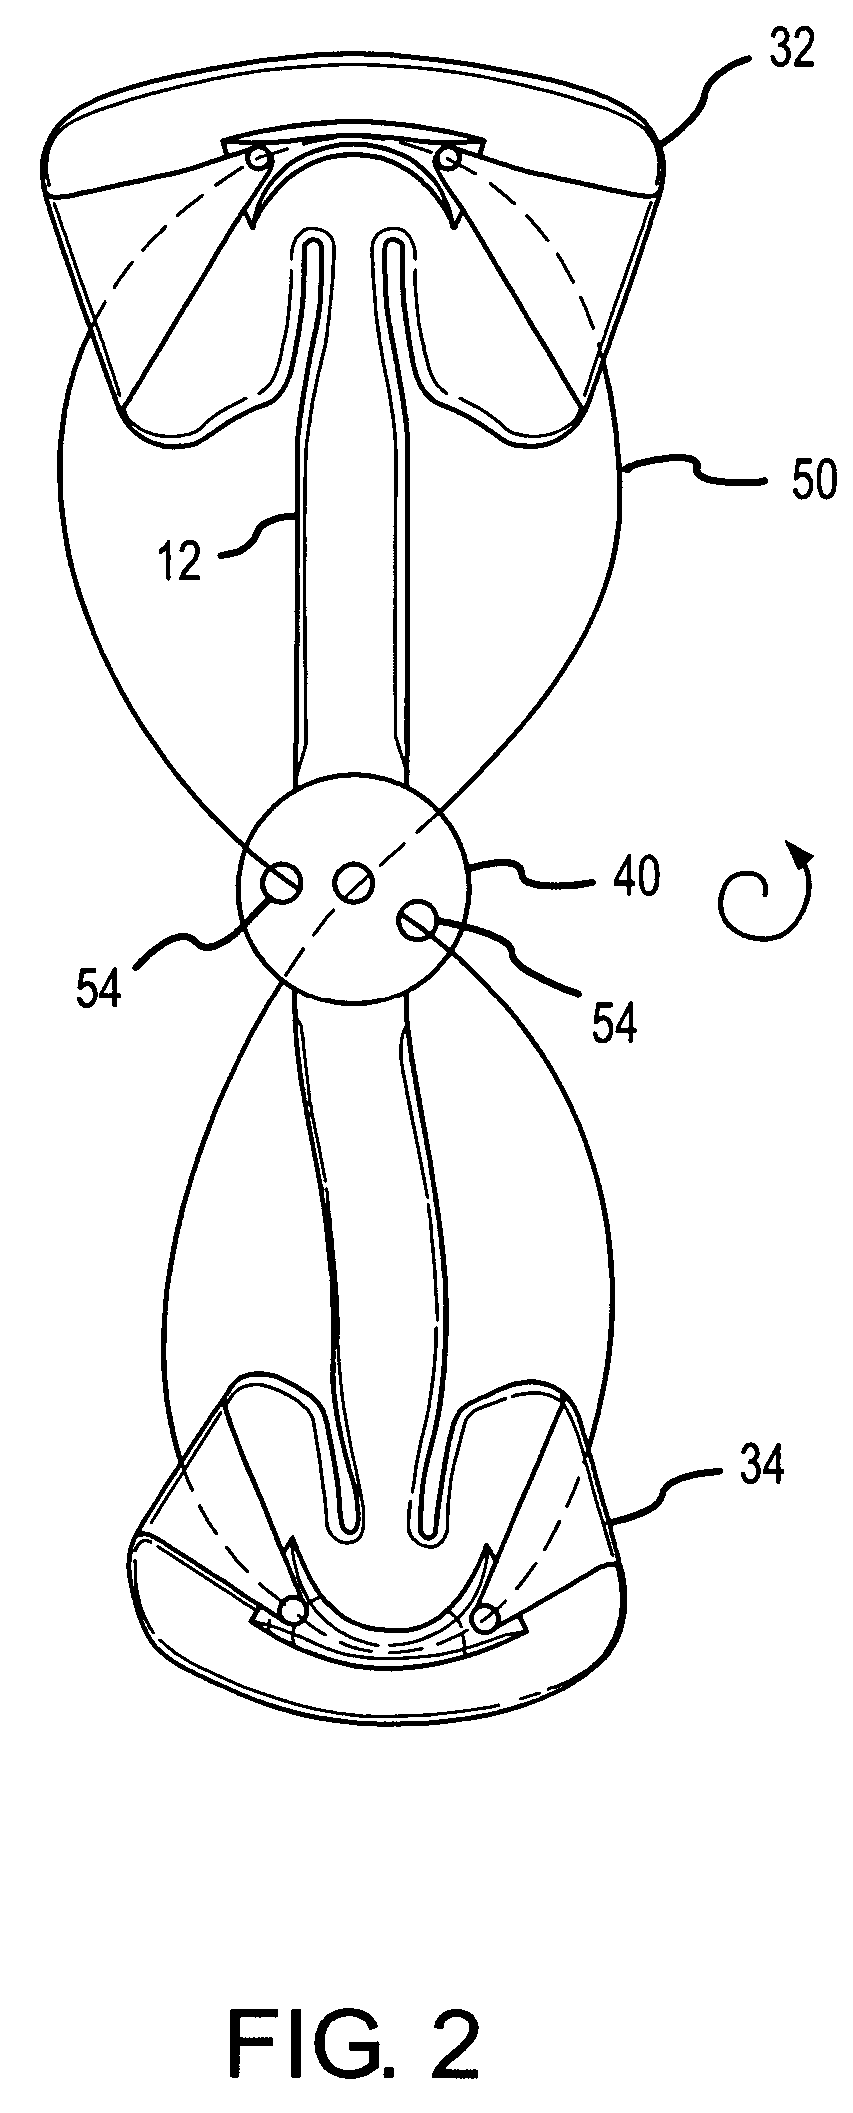 Orthotic or prosthetic devices with adjustable force dosimeter and sensor